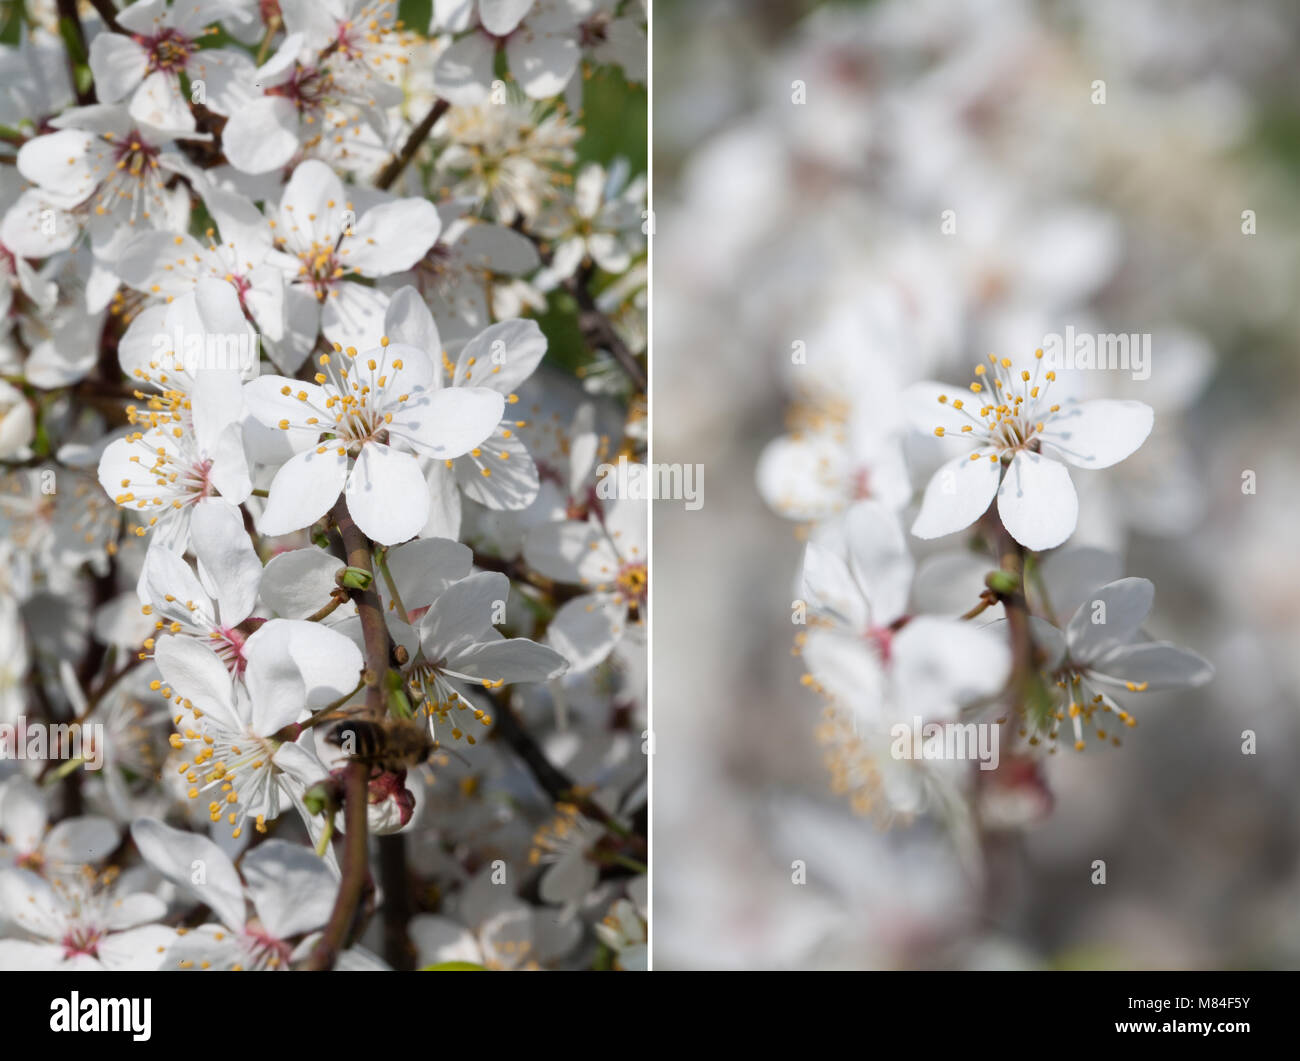 depth of field, comparison of two photos Stock Photo